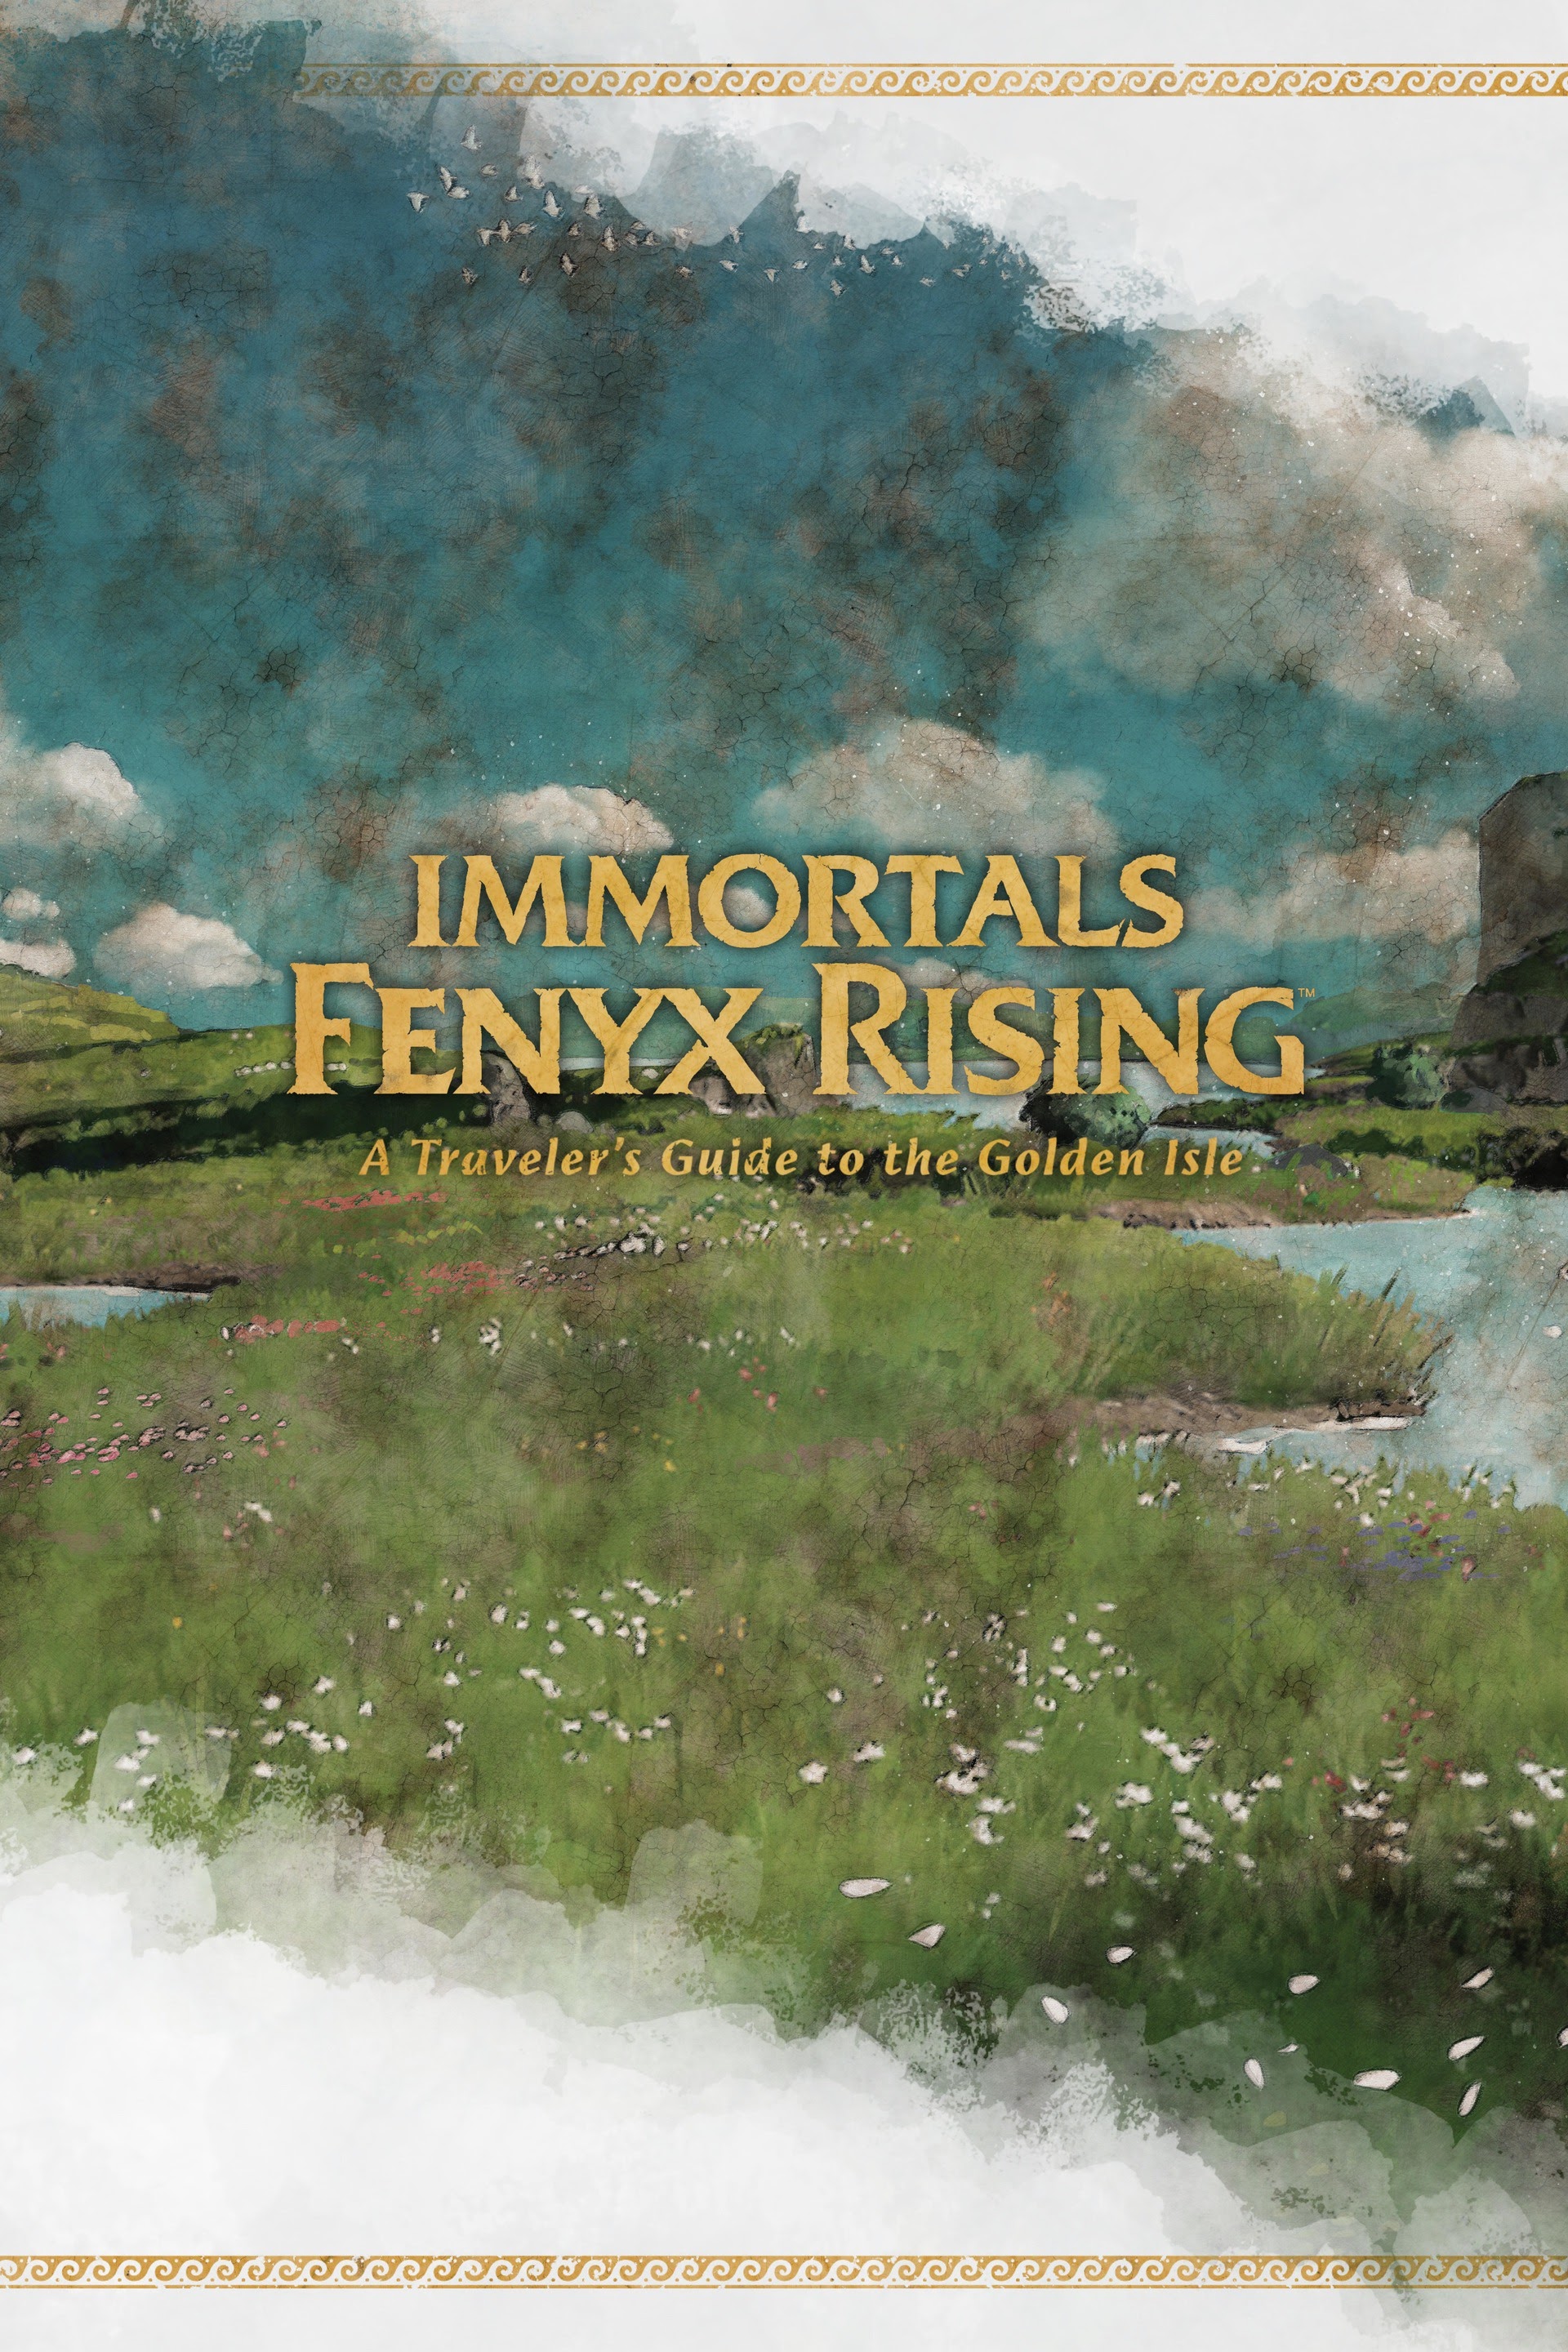 Read online Immortals Fenyx Rising: A Traveler's Guide to the Golden Isle comic -  Issue # TPB - 4